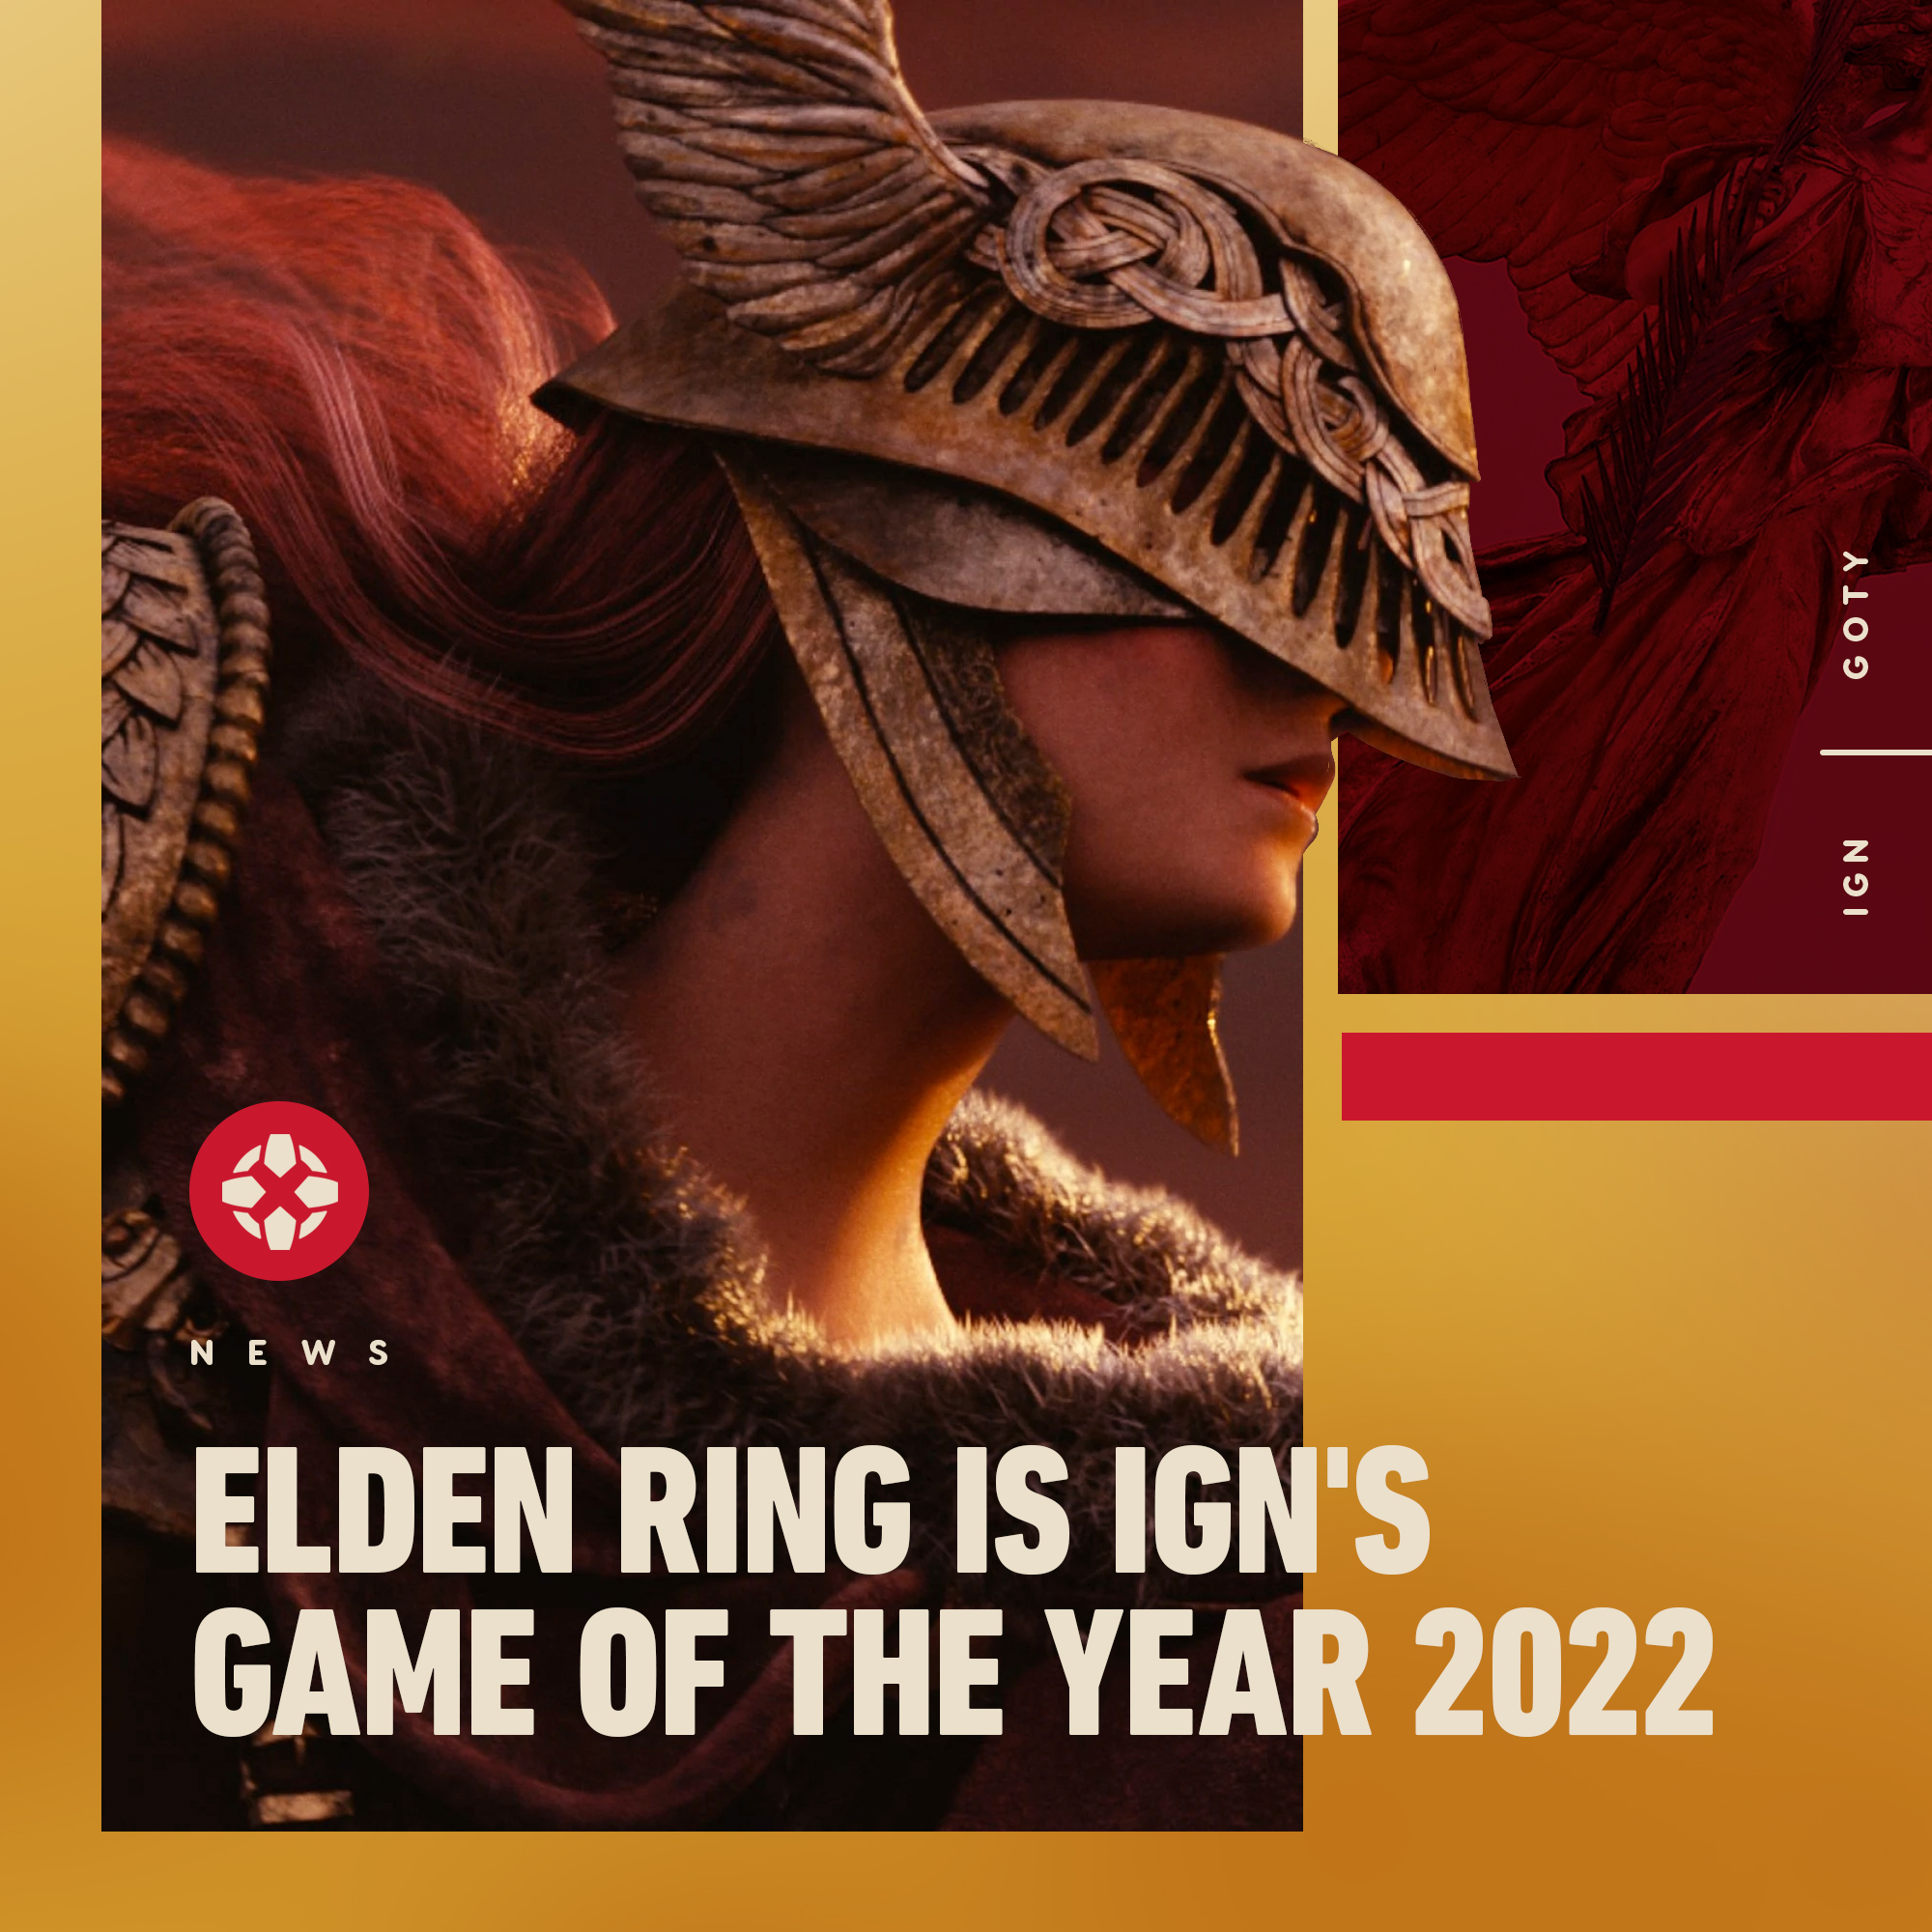 Congratulations, you played yourself! : r/Eldenring